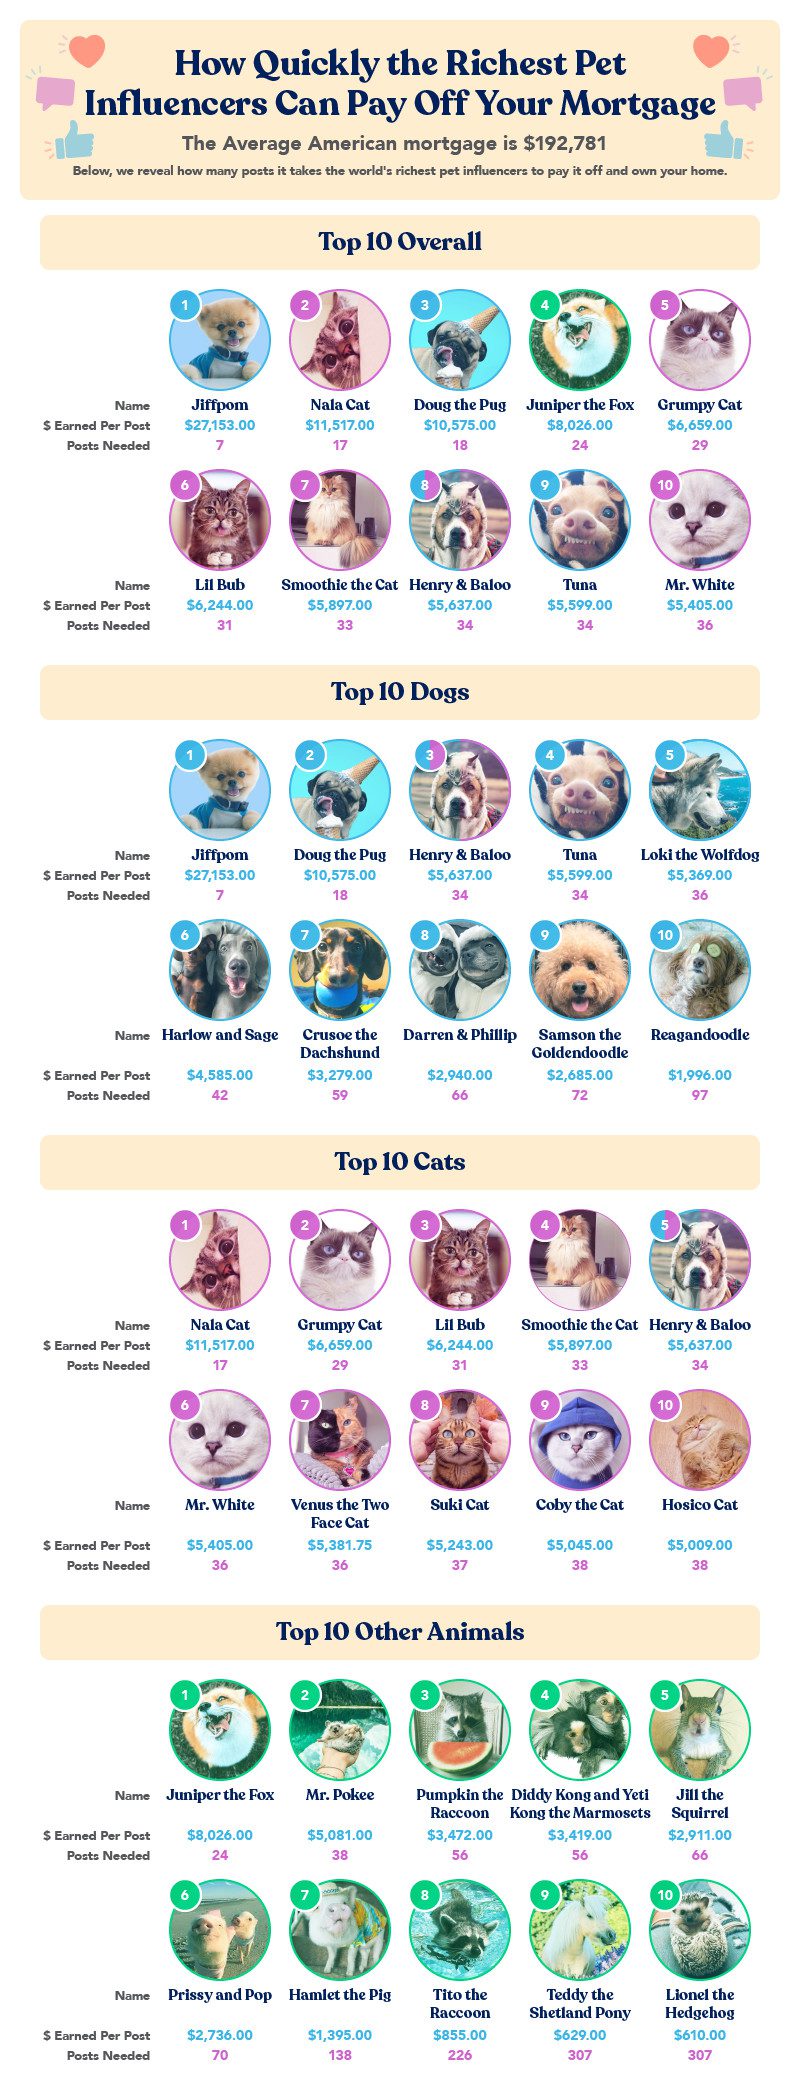 Chart showing categories of richest pet influencers and their earnings